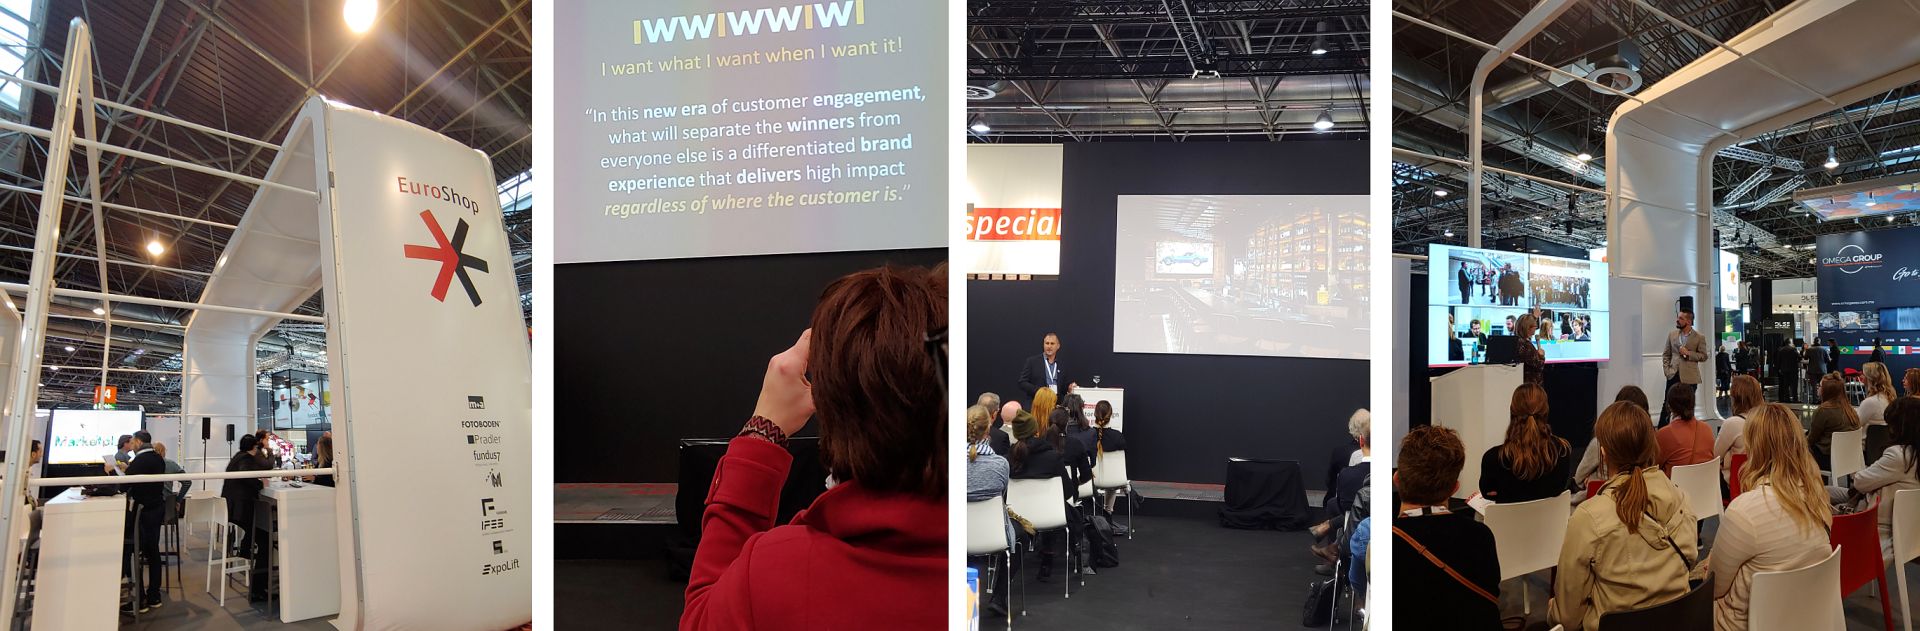 Retail presentations and trends at EuroShop